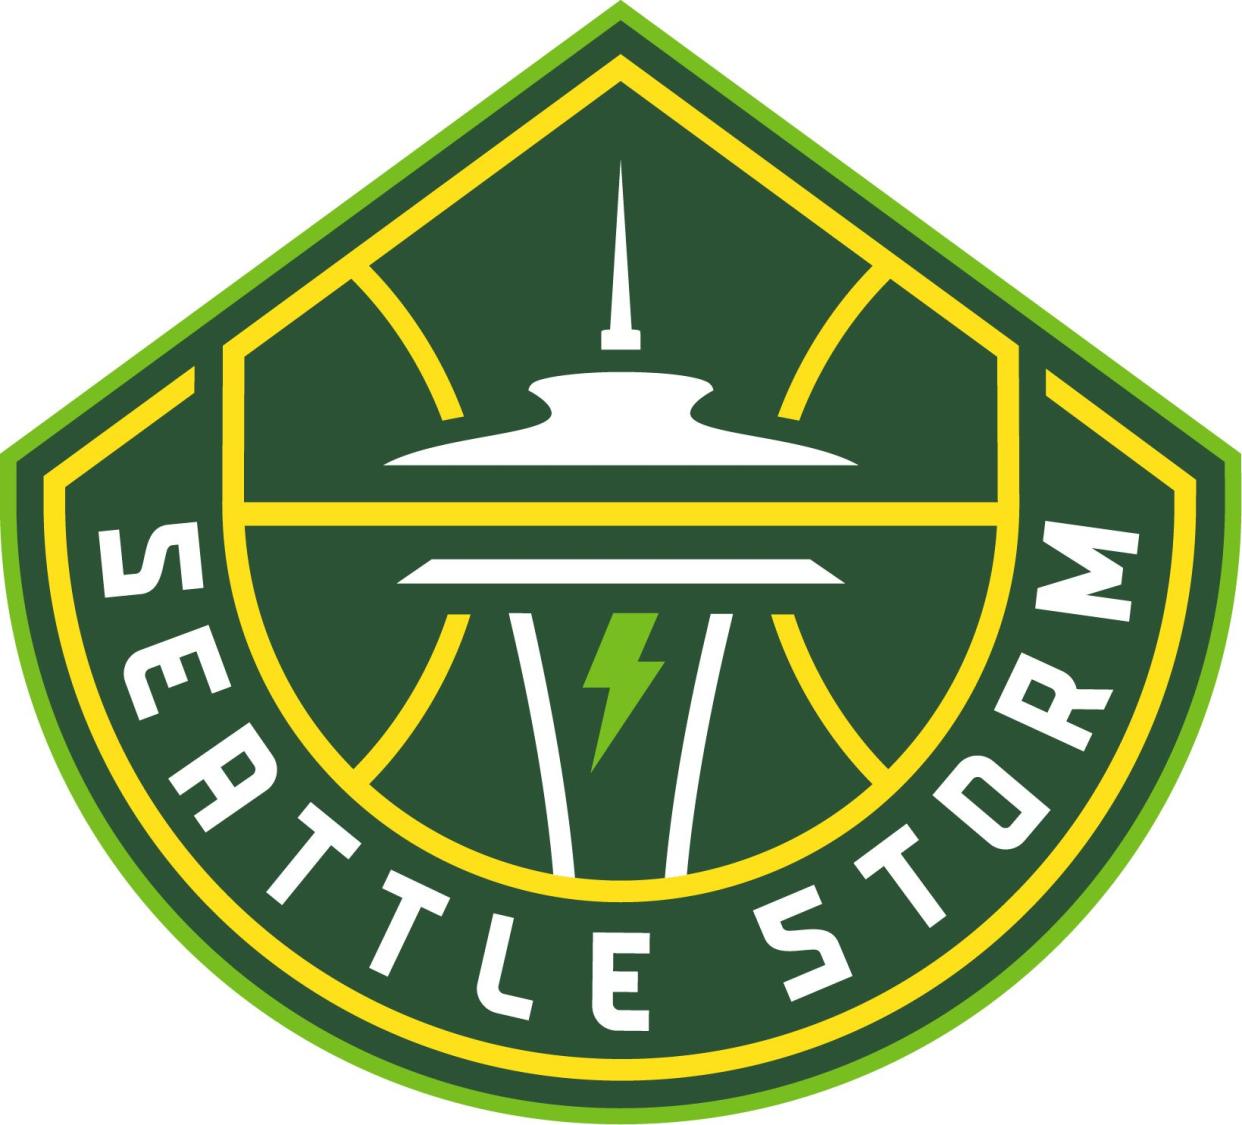 The Seattle Storm's new logo.